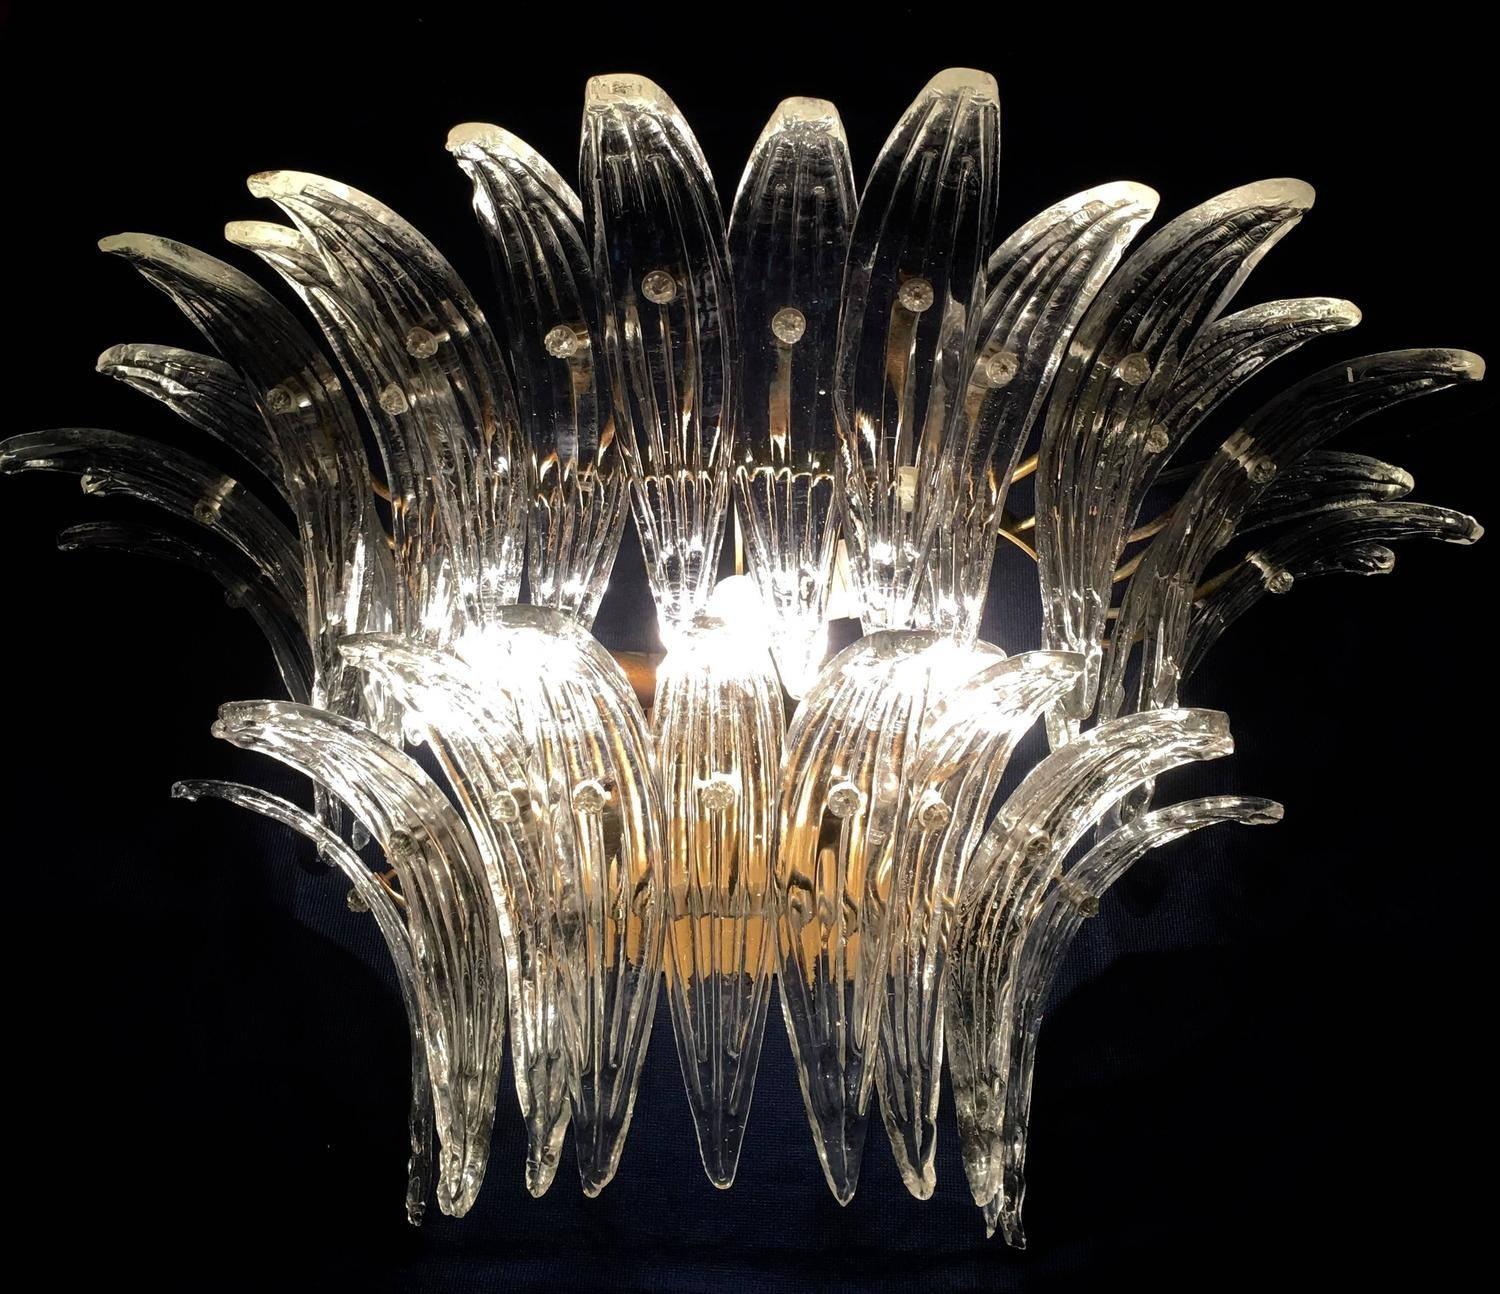 The sconces and chandeliers were located in the hall of a big hotel on the Amalfi Coast. Each individual sconce is composed by 29 large leaves in pure Murano glass.